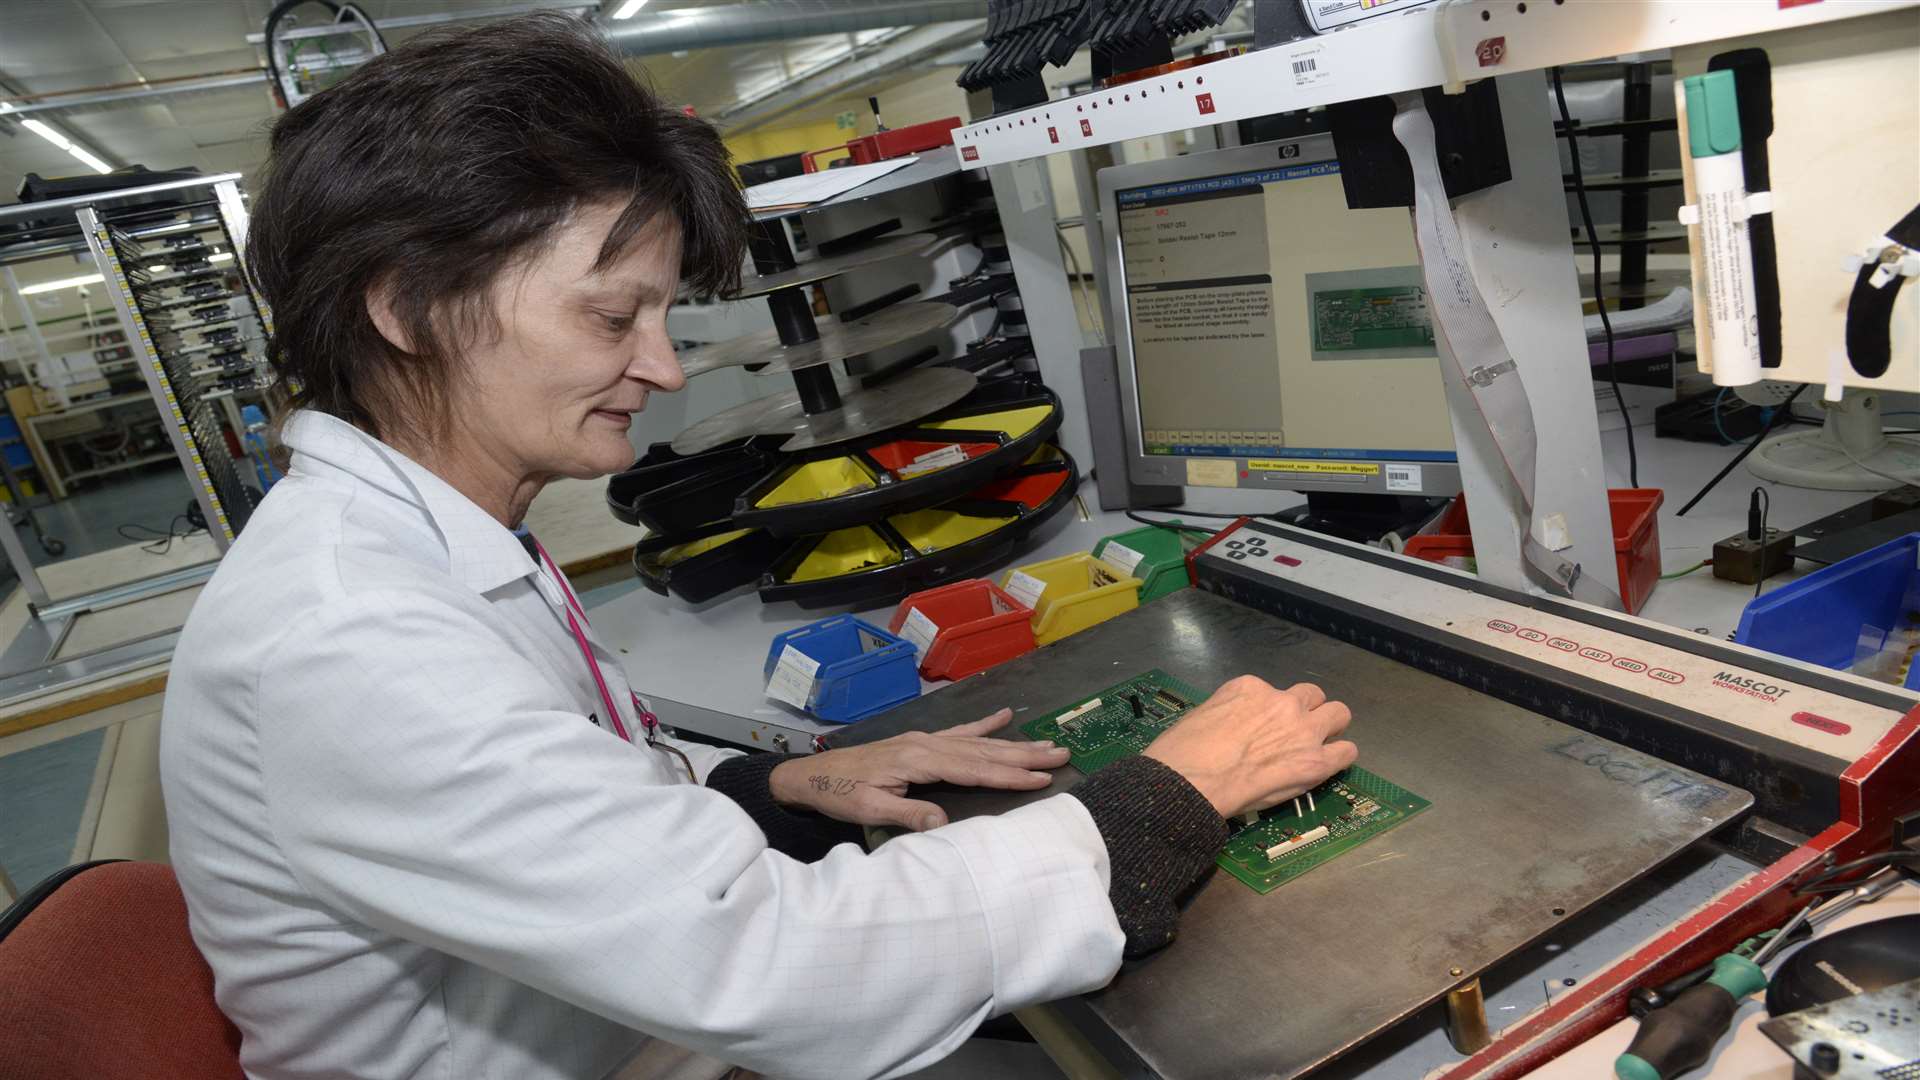 Deana McCarthy assembles a circuit board at Megger's factory, which is celebrating 50 years